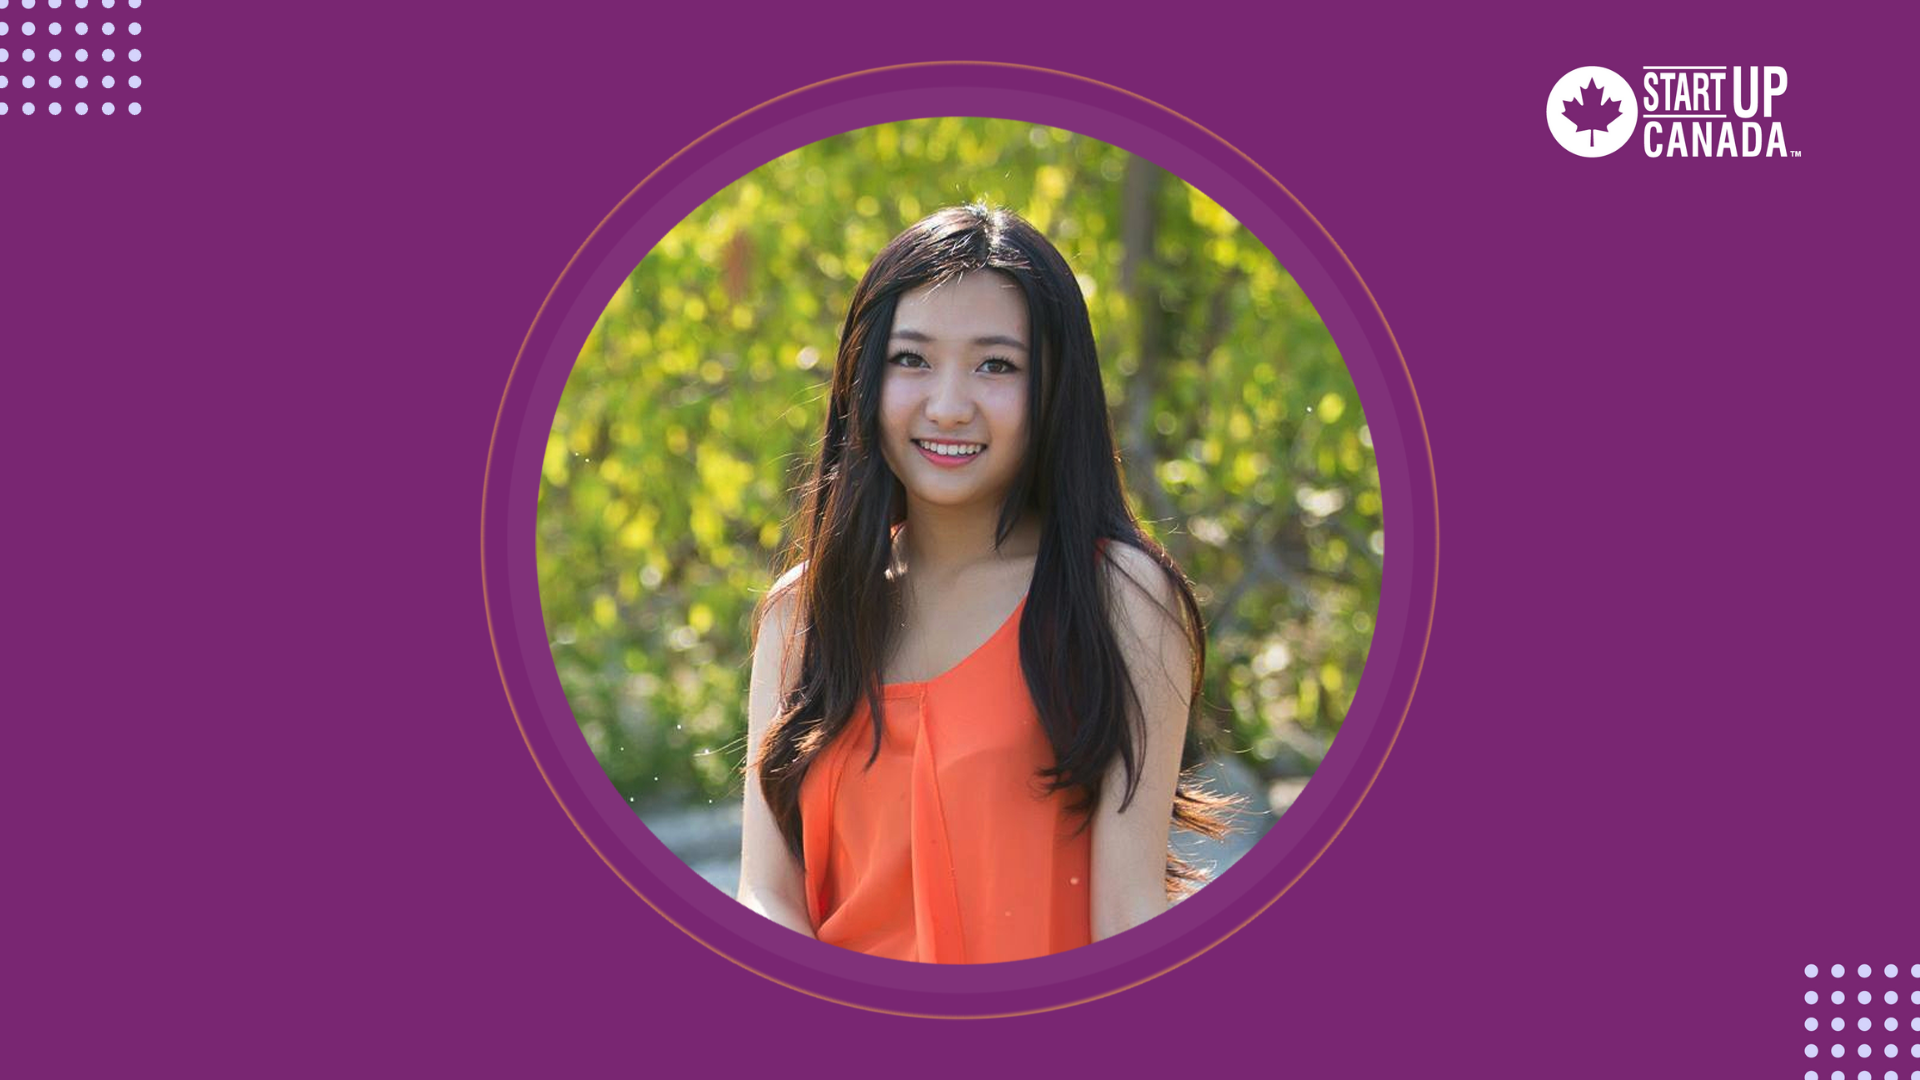 Celebrate Asian entrepreneurs such as Ivy Chen from CMEOW